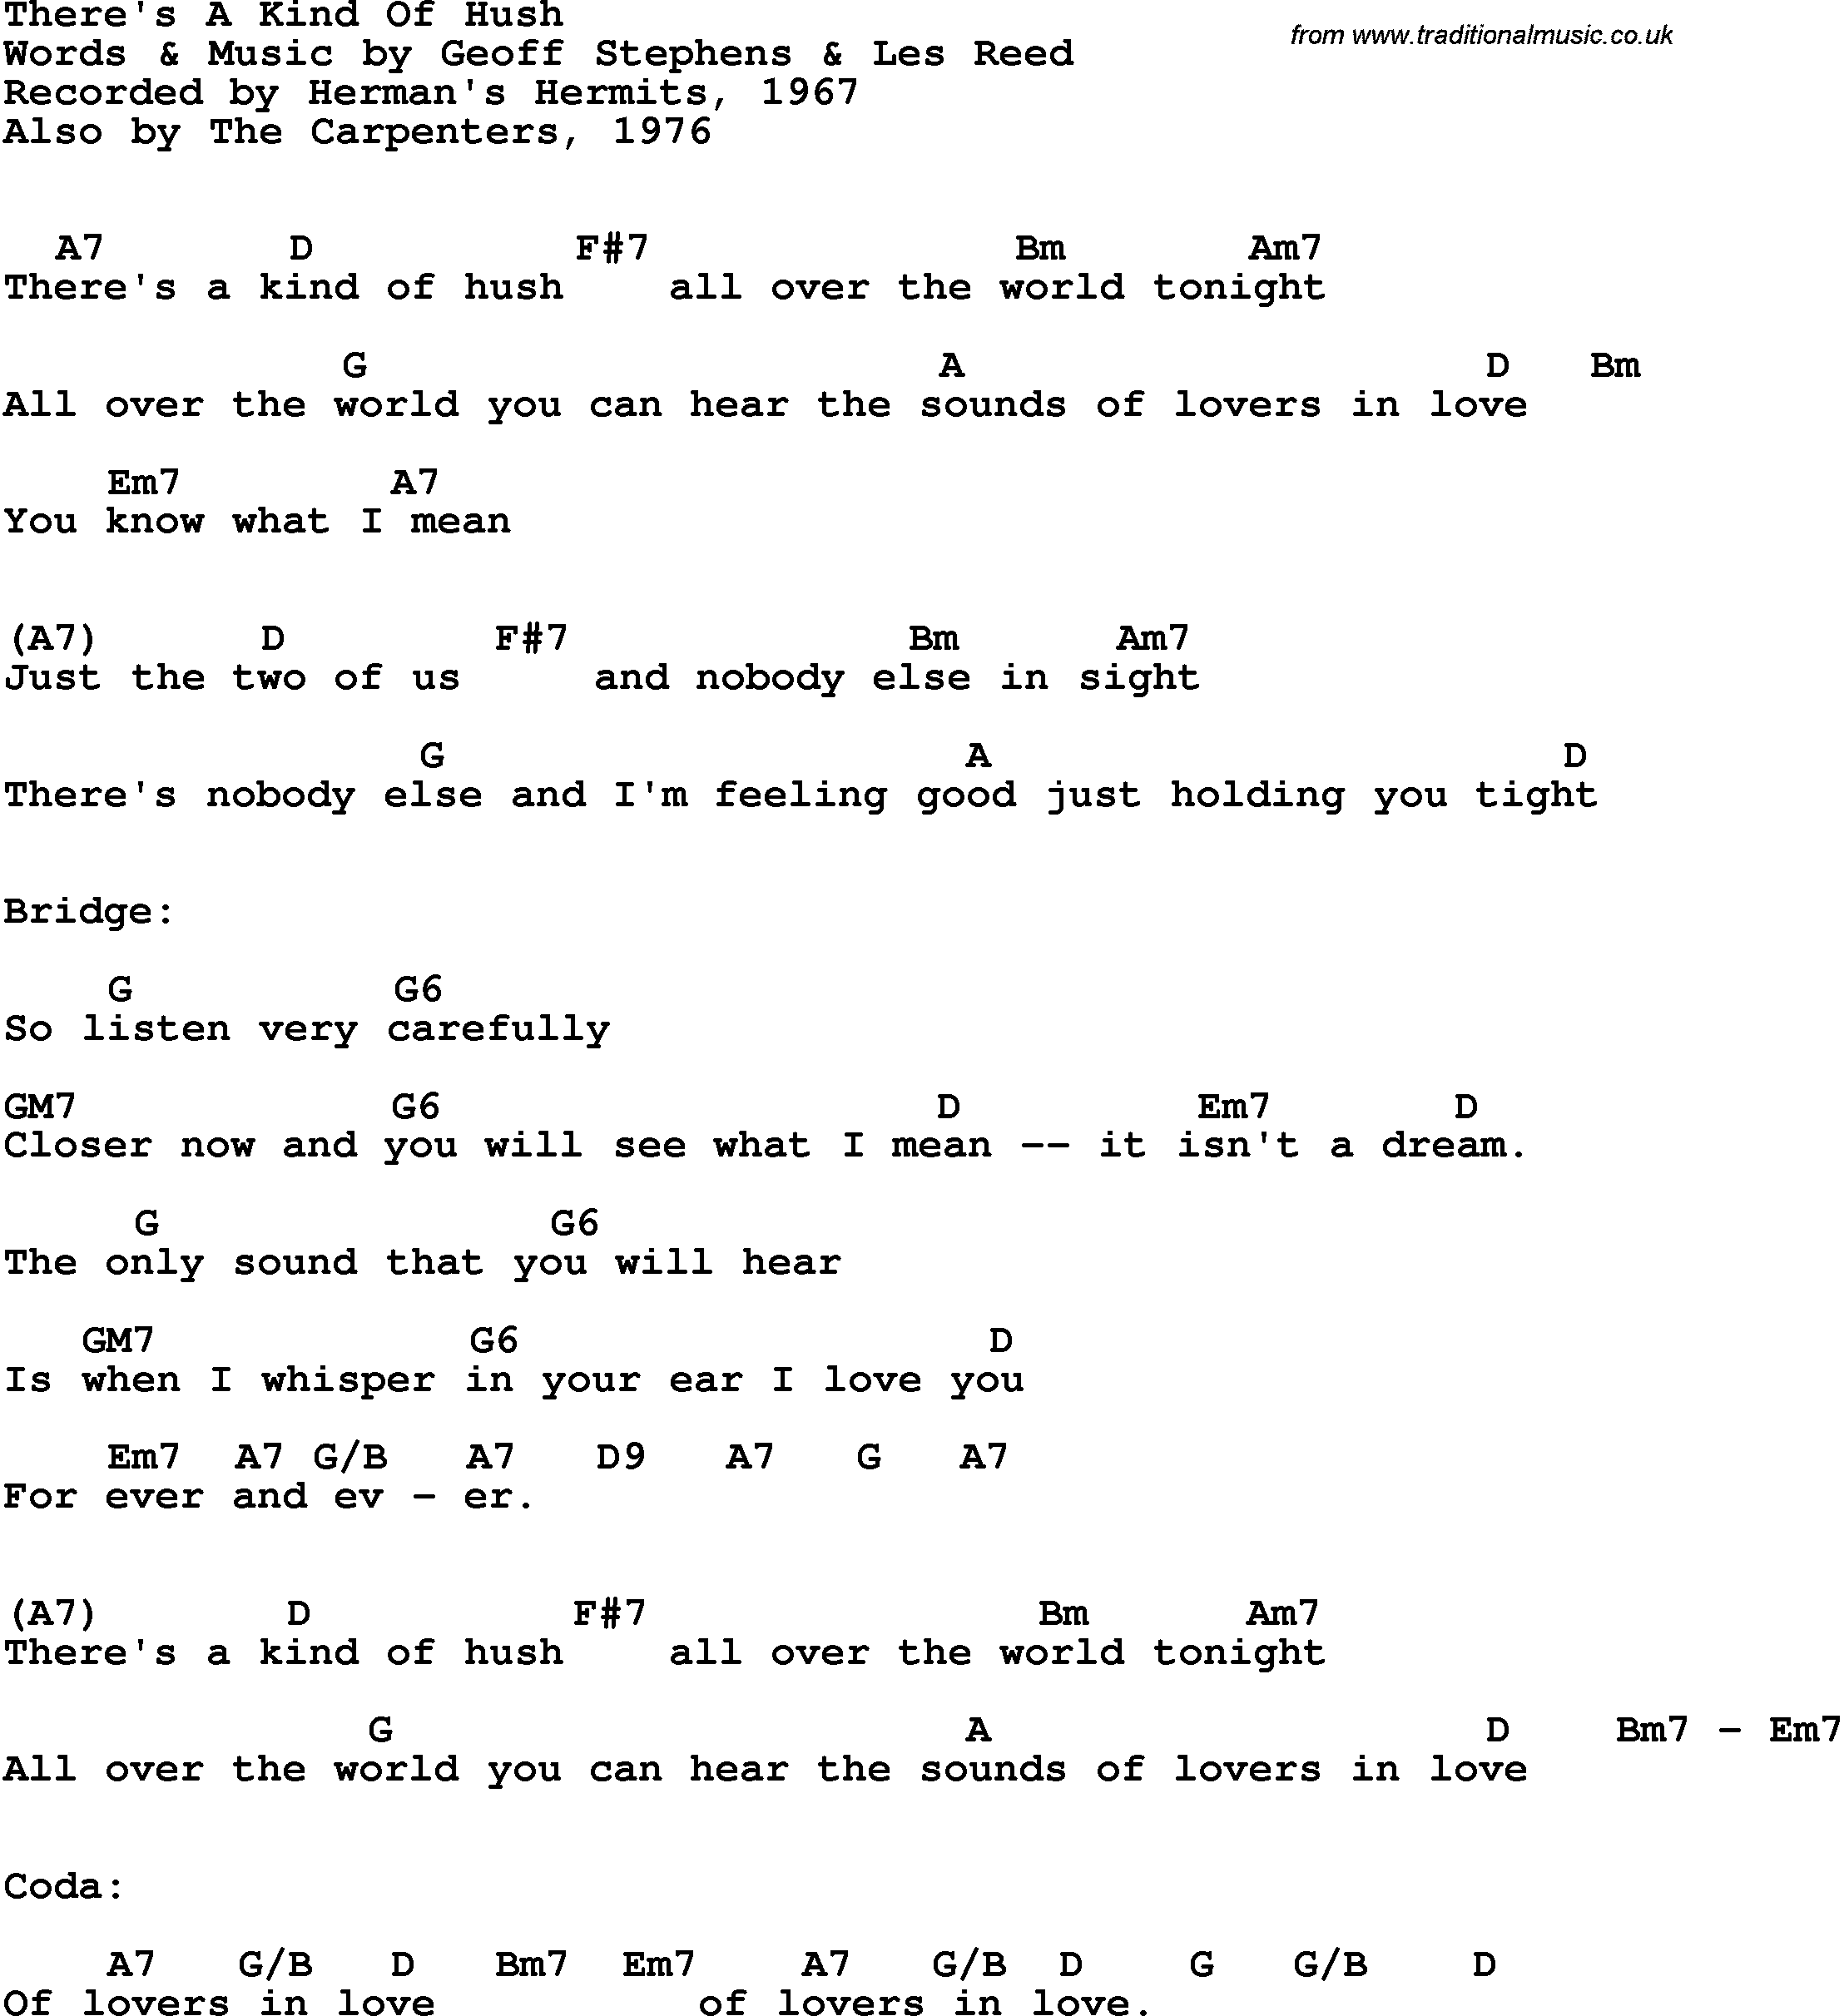 Song Lyrics with guitar chords for There's A Kind Of Hush - Carpenters, The, 1976